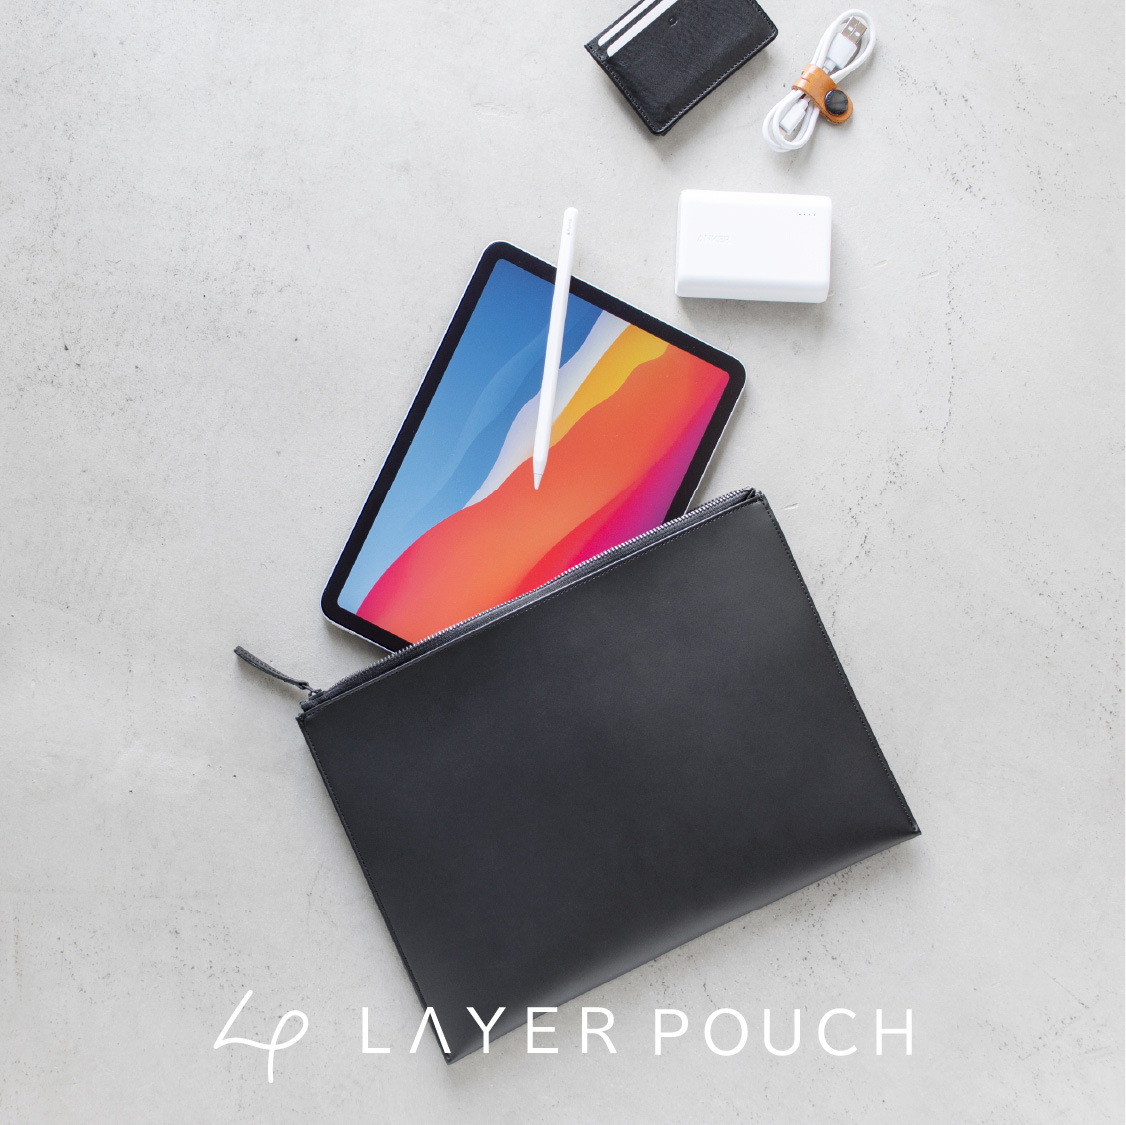 Layer Pouch レイヤーポーチ lp-v179